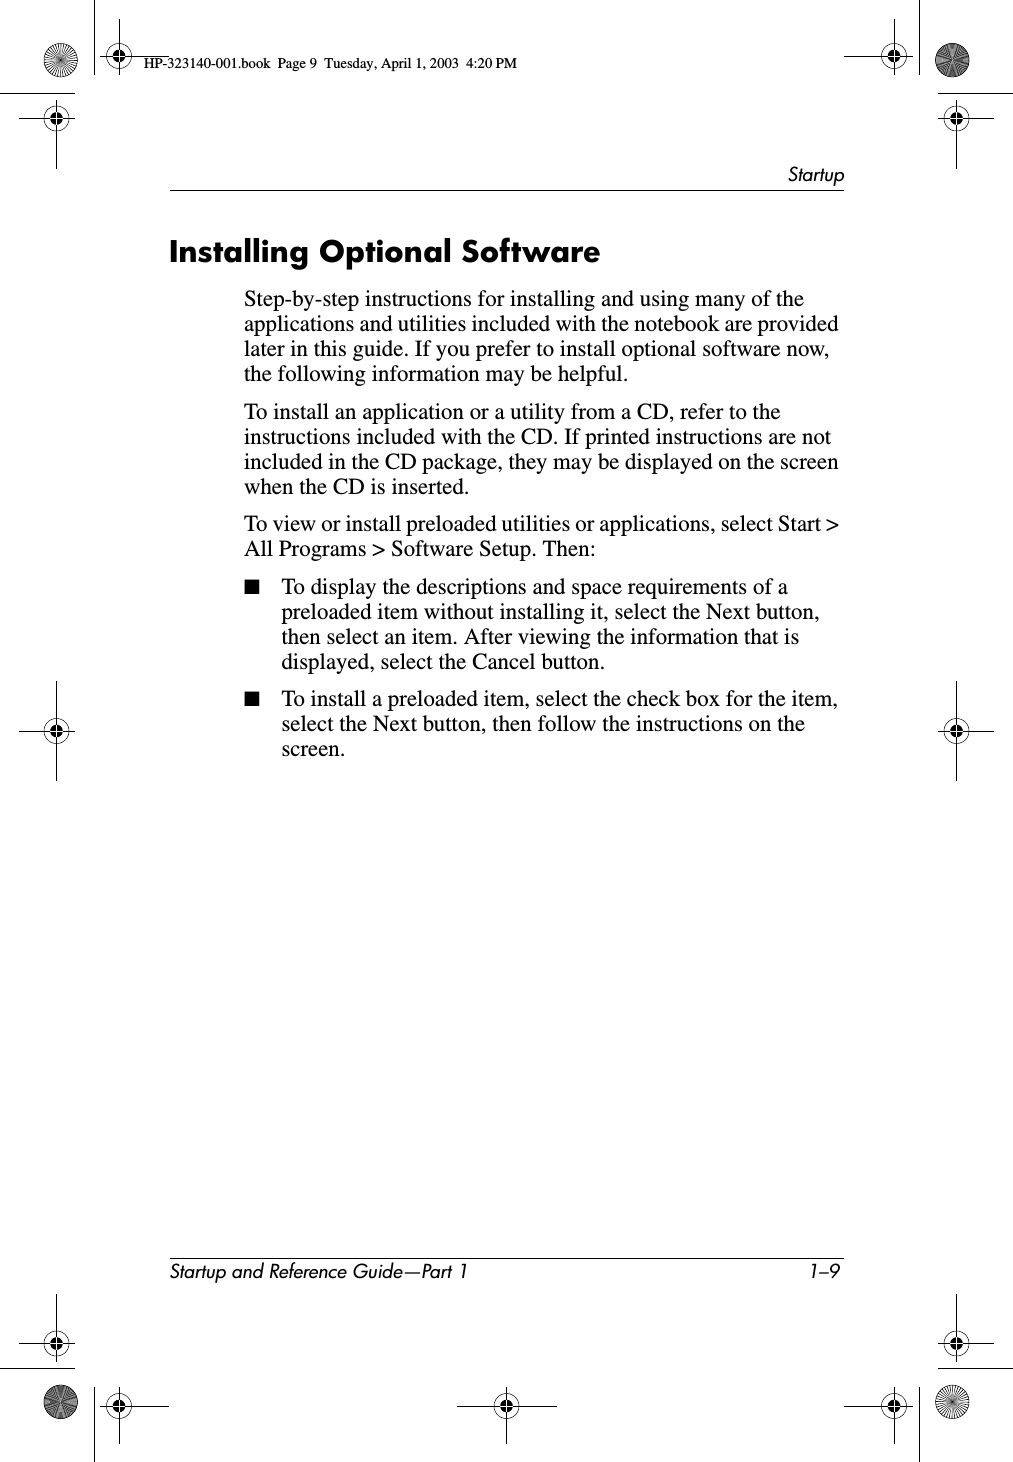 StartupStartup and Reference Guide—Part 1 1–9Installing Optional SoftwareStep-by-step instructions for installing and using many of the applications and utilities included with the notebook are provided later in this guide. If you prefer to install optional software now, the following information may be helpful.To install an application or a utility from a CD, refer to the instructions included with the CD. If printed instructions are not included in the CD package, they may be displayed on the screen when the CD is inserted.To view or install preloaded utilities or applications, select Start &gt; All Programs &gt; Software Setup. Then:■To display the descriptions and space requirements of a preloaded item without installing it, select the Next button, then select an item. After viewing the information that is displayed, select the Cancel button.■To install a preloaded item, select the check box for the item, select the Next button, then follow the instructions on the screen.HP-323140-001.book  Page 9  Tuesday, April 1, 2003  4:20 PM